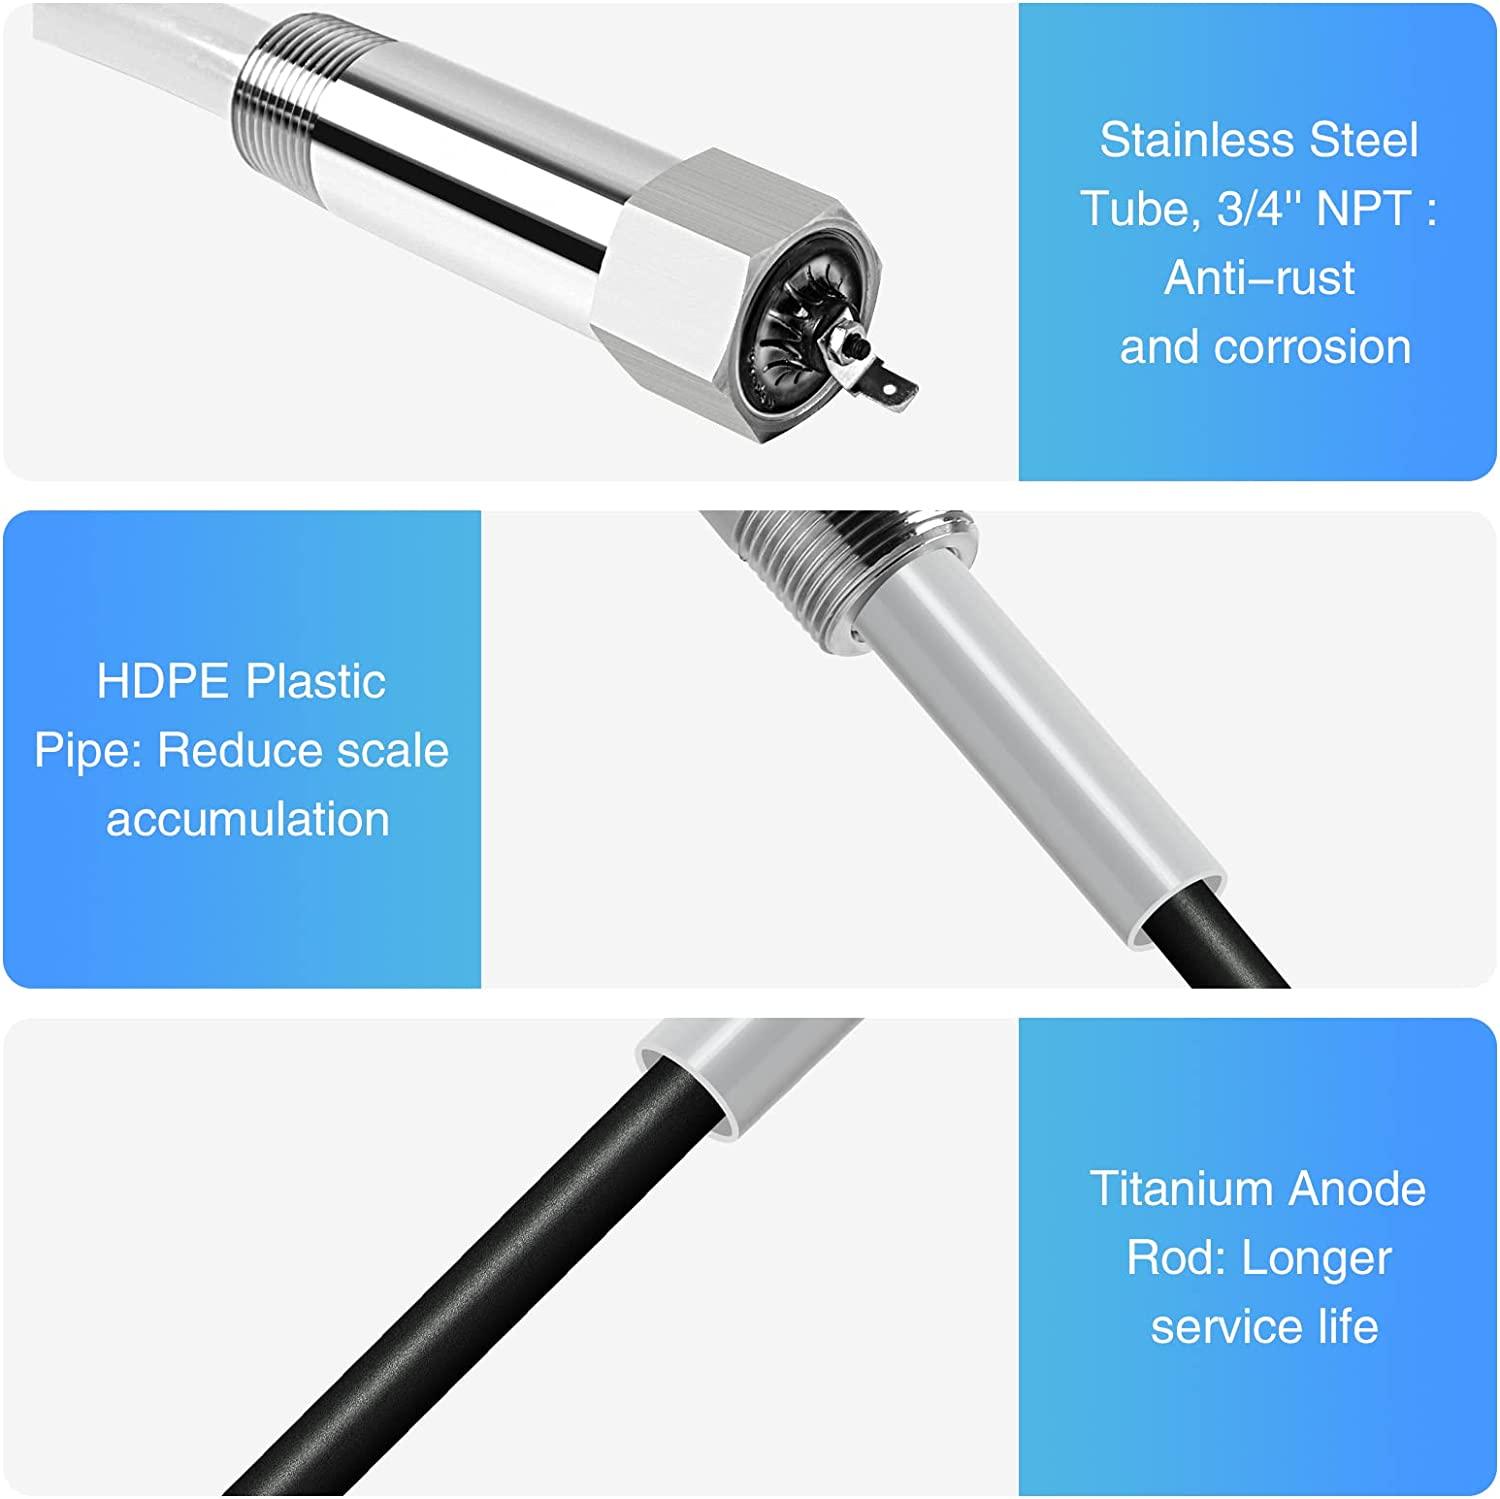 Powered Anode Rod, Briidea Water Heater Anode Rod Made of Titanium (40-89 Gallon Tank), Say Goodbye to Rotten Egg Smell within 24 hours, Anti-Rust and Corrosion, Reduce Limescale